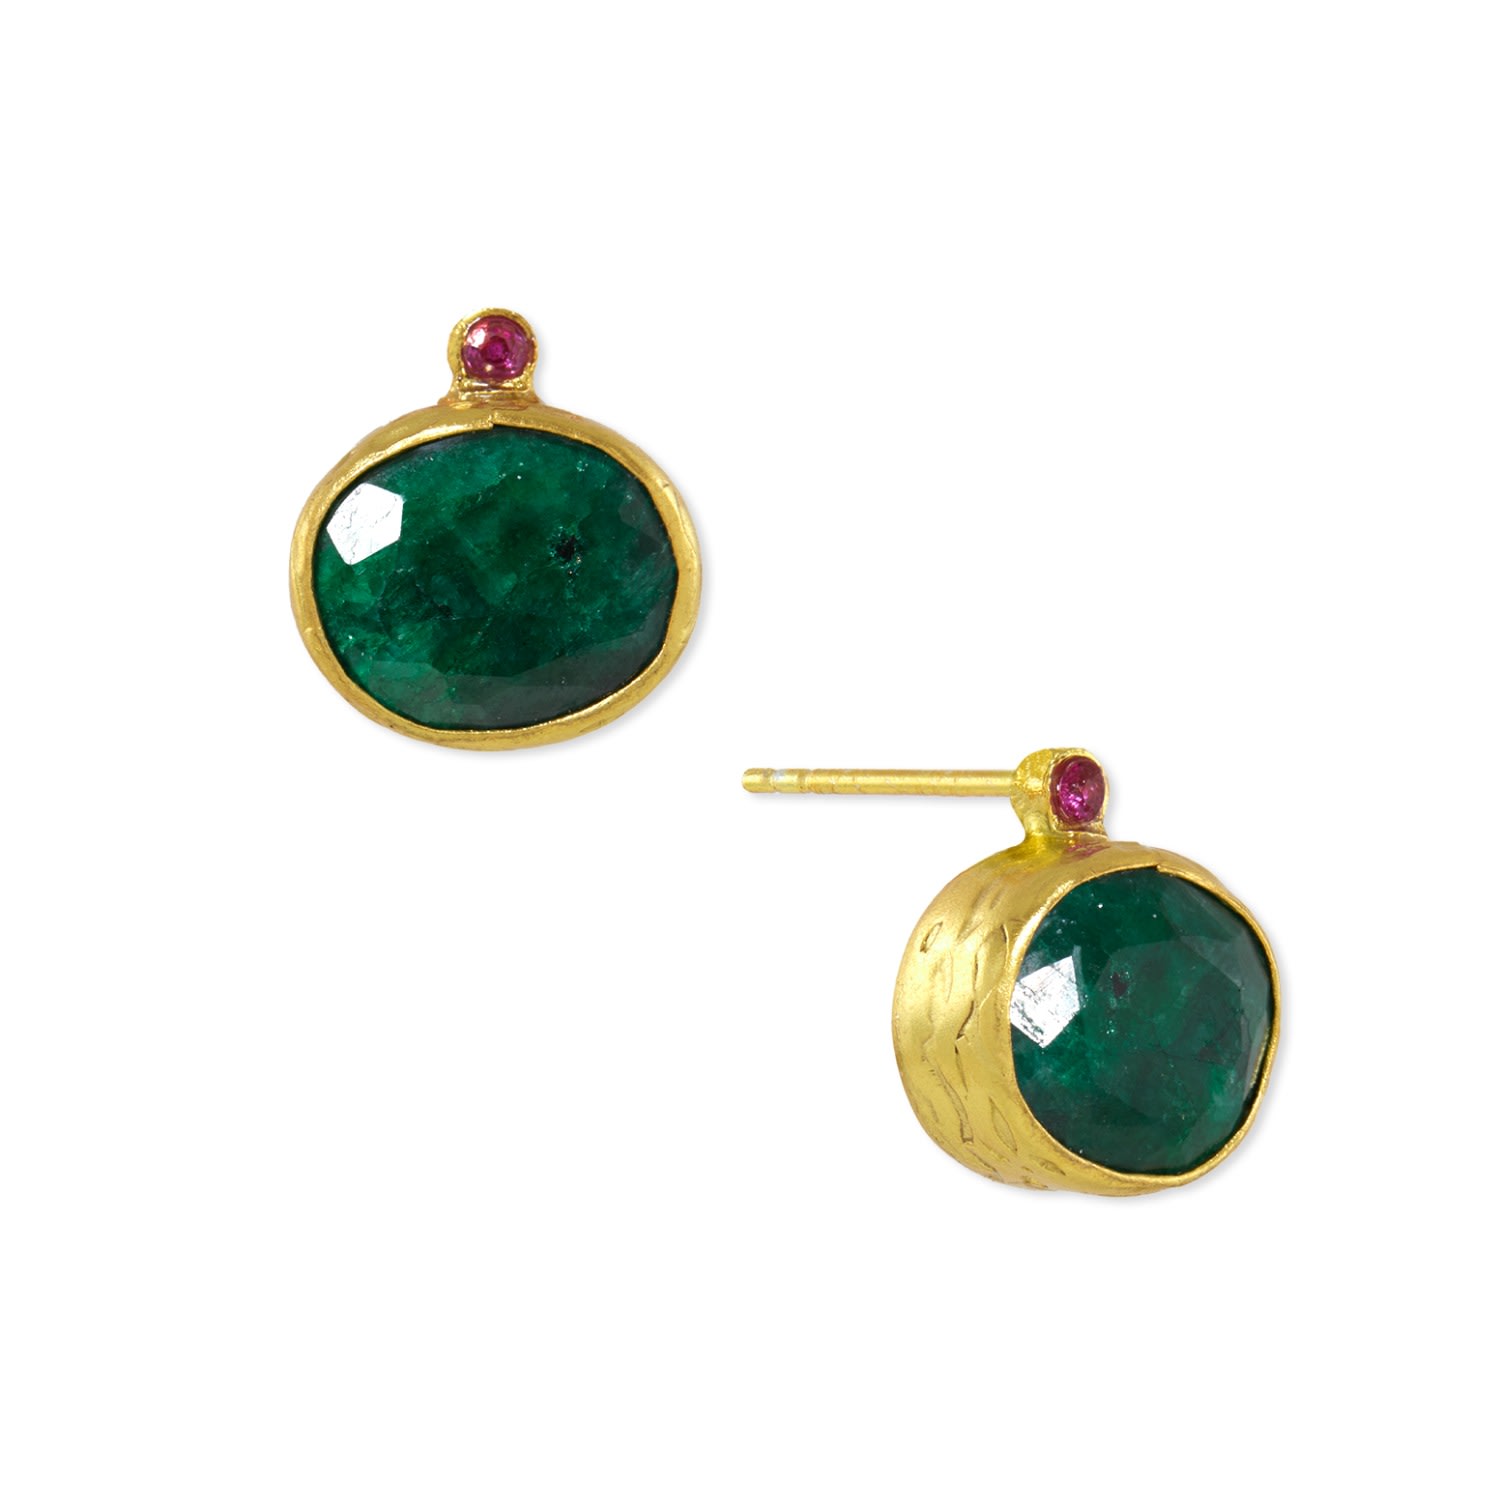 Ottoman Hands Women's Green Lucia Emerald And Pink Crystals Stud Earrings